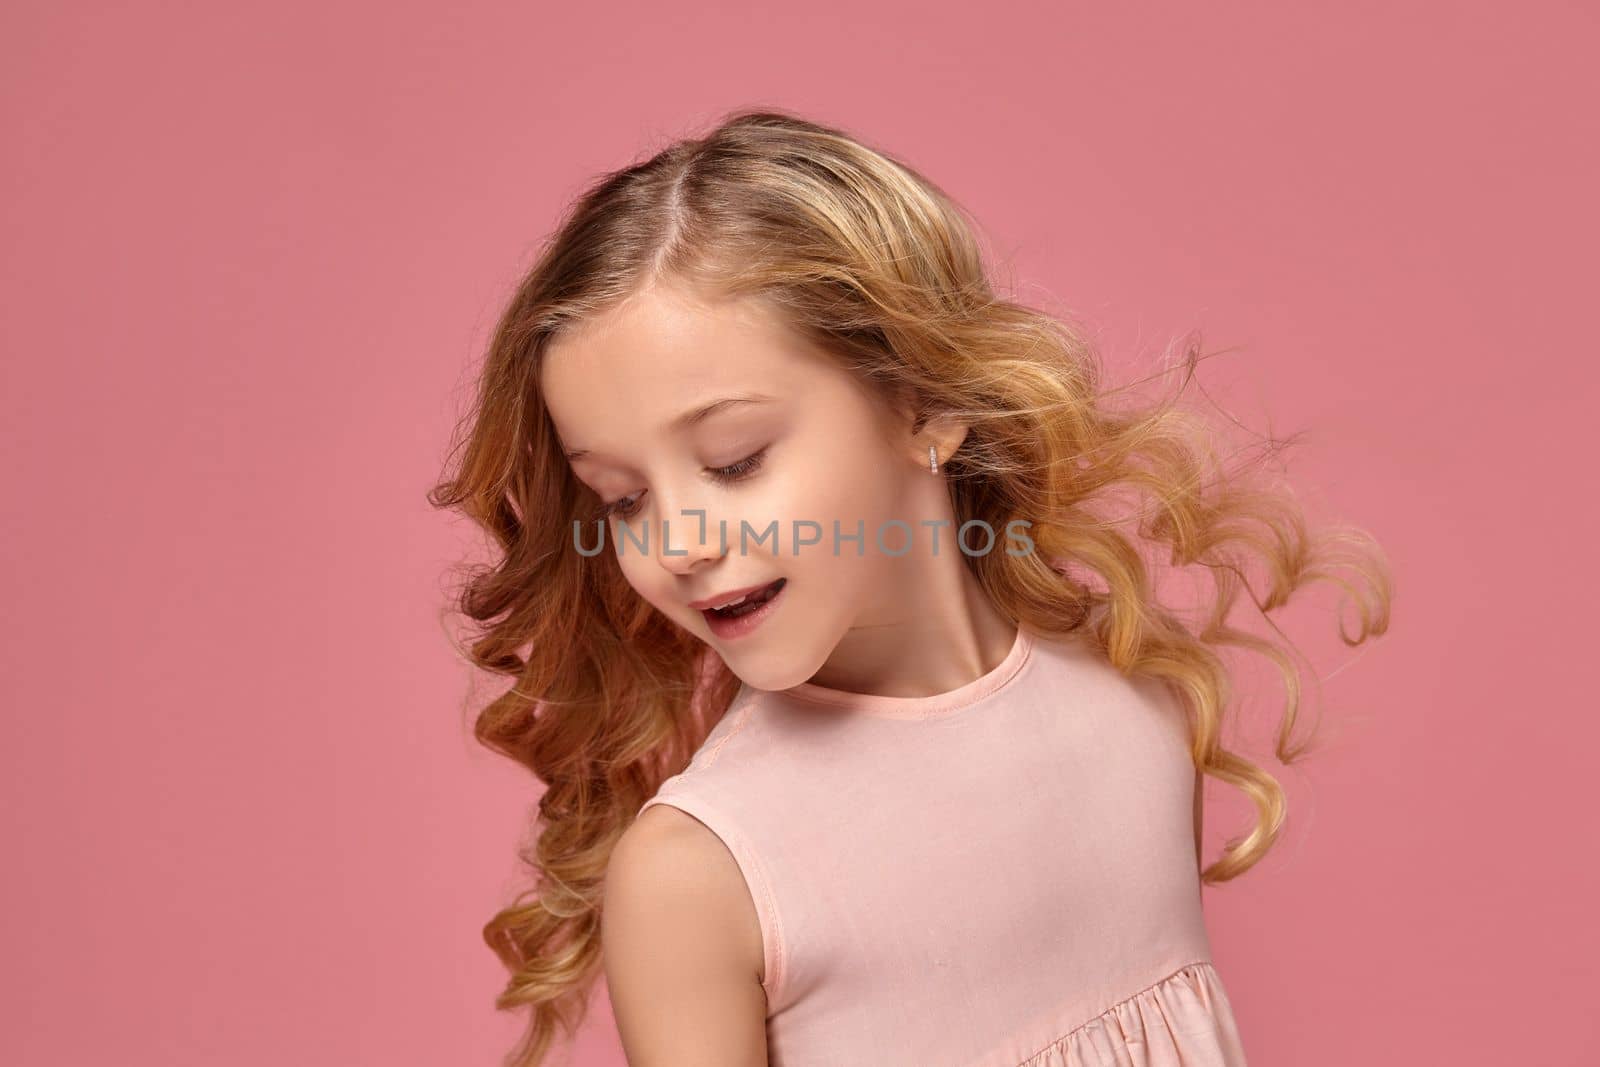 Little girl with a blond curly hair, in a pink dress poses for the camera and looks back, on a pink background